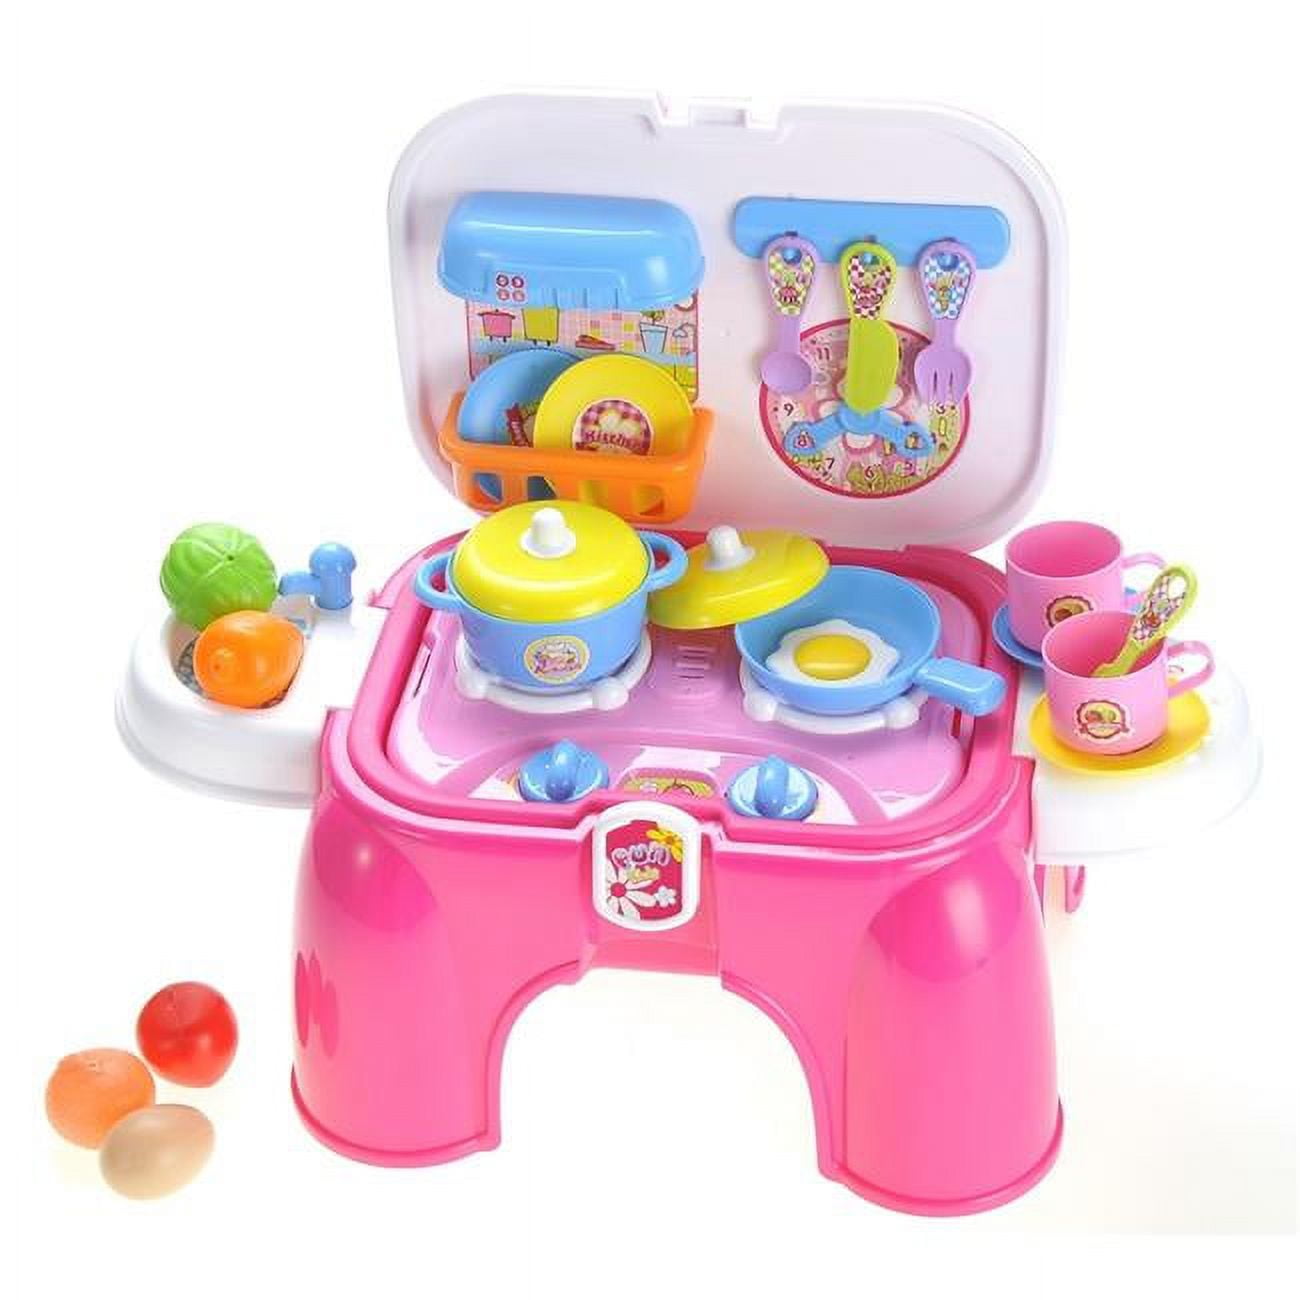 Ps93a Electric Portable Kids Kitchen Cooking Set Toy, Lights & Sounds - Folds Into Stepstool